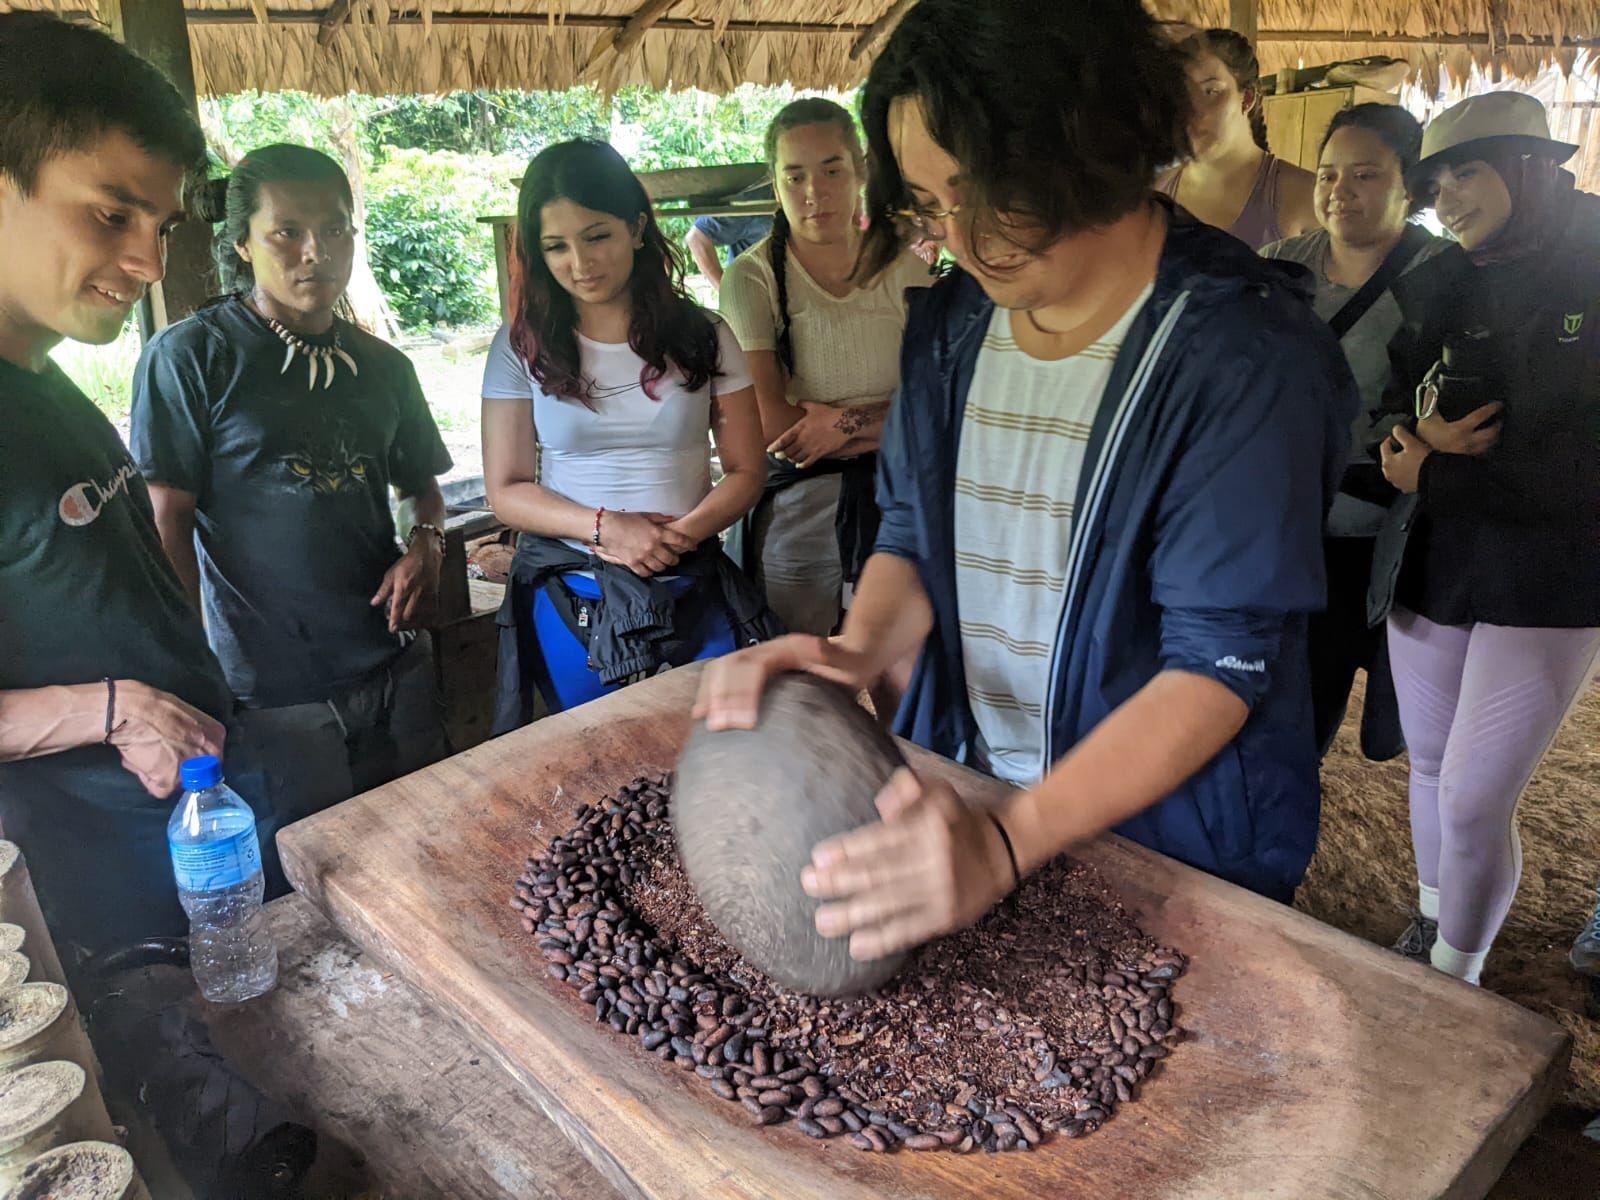 Global Field Trip students crushing beans in Costa Rica with community members explaining process